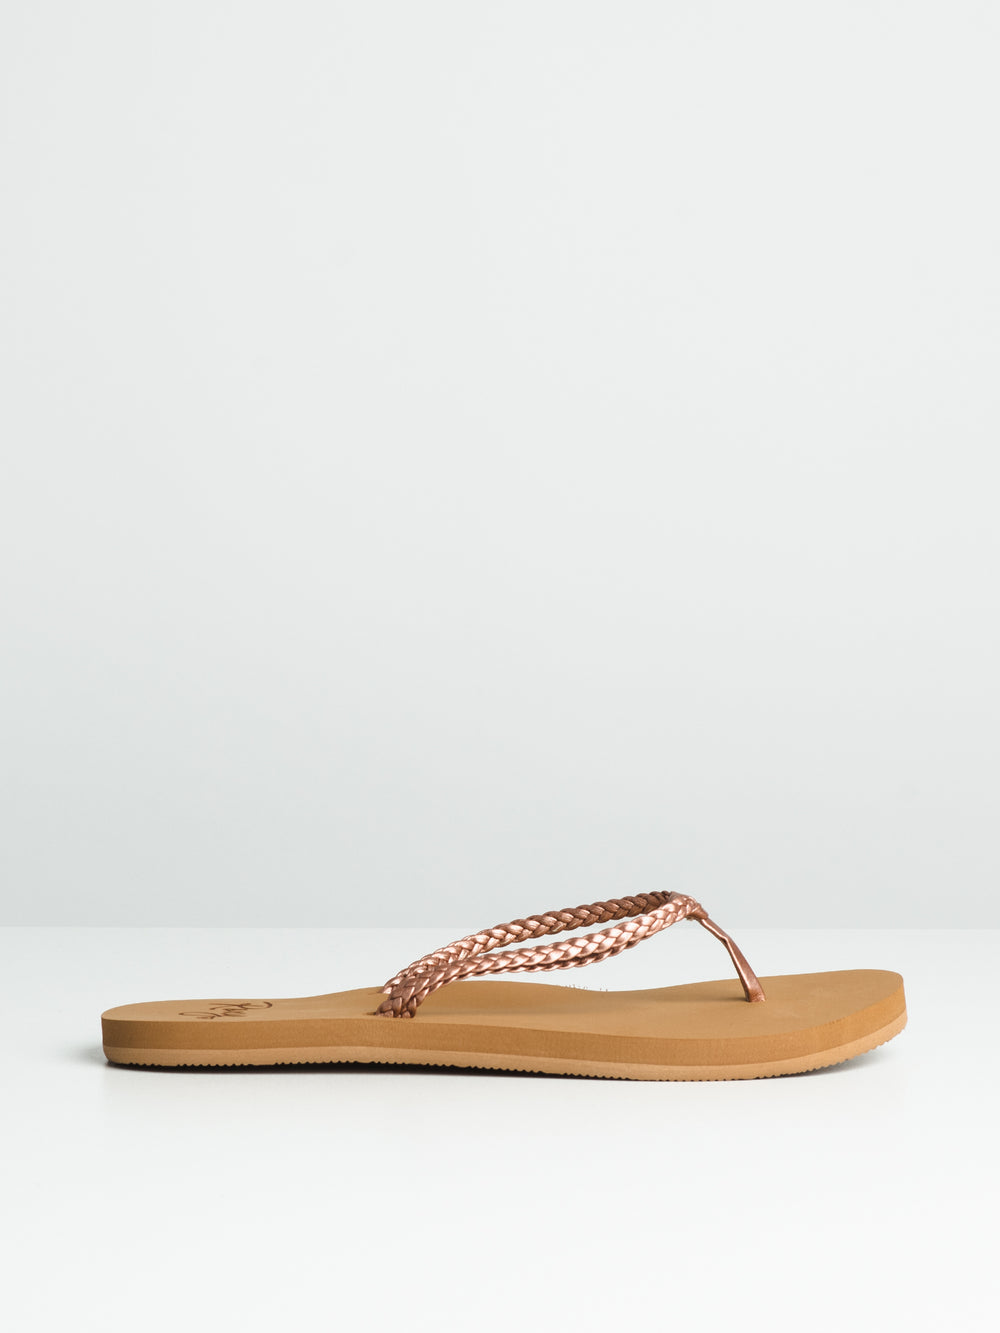 WOMENS ROXY COSTAS SANDALS - CLEARANCE